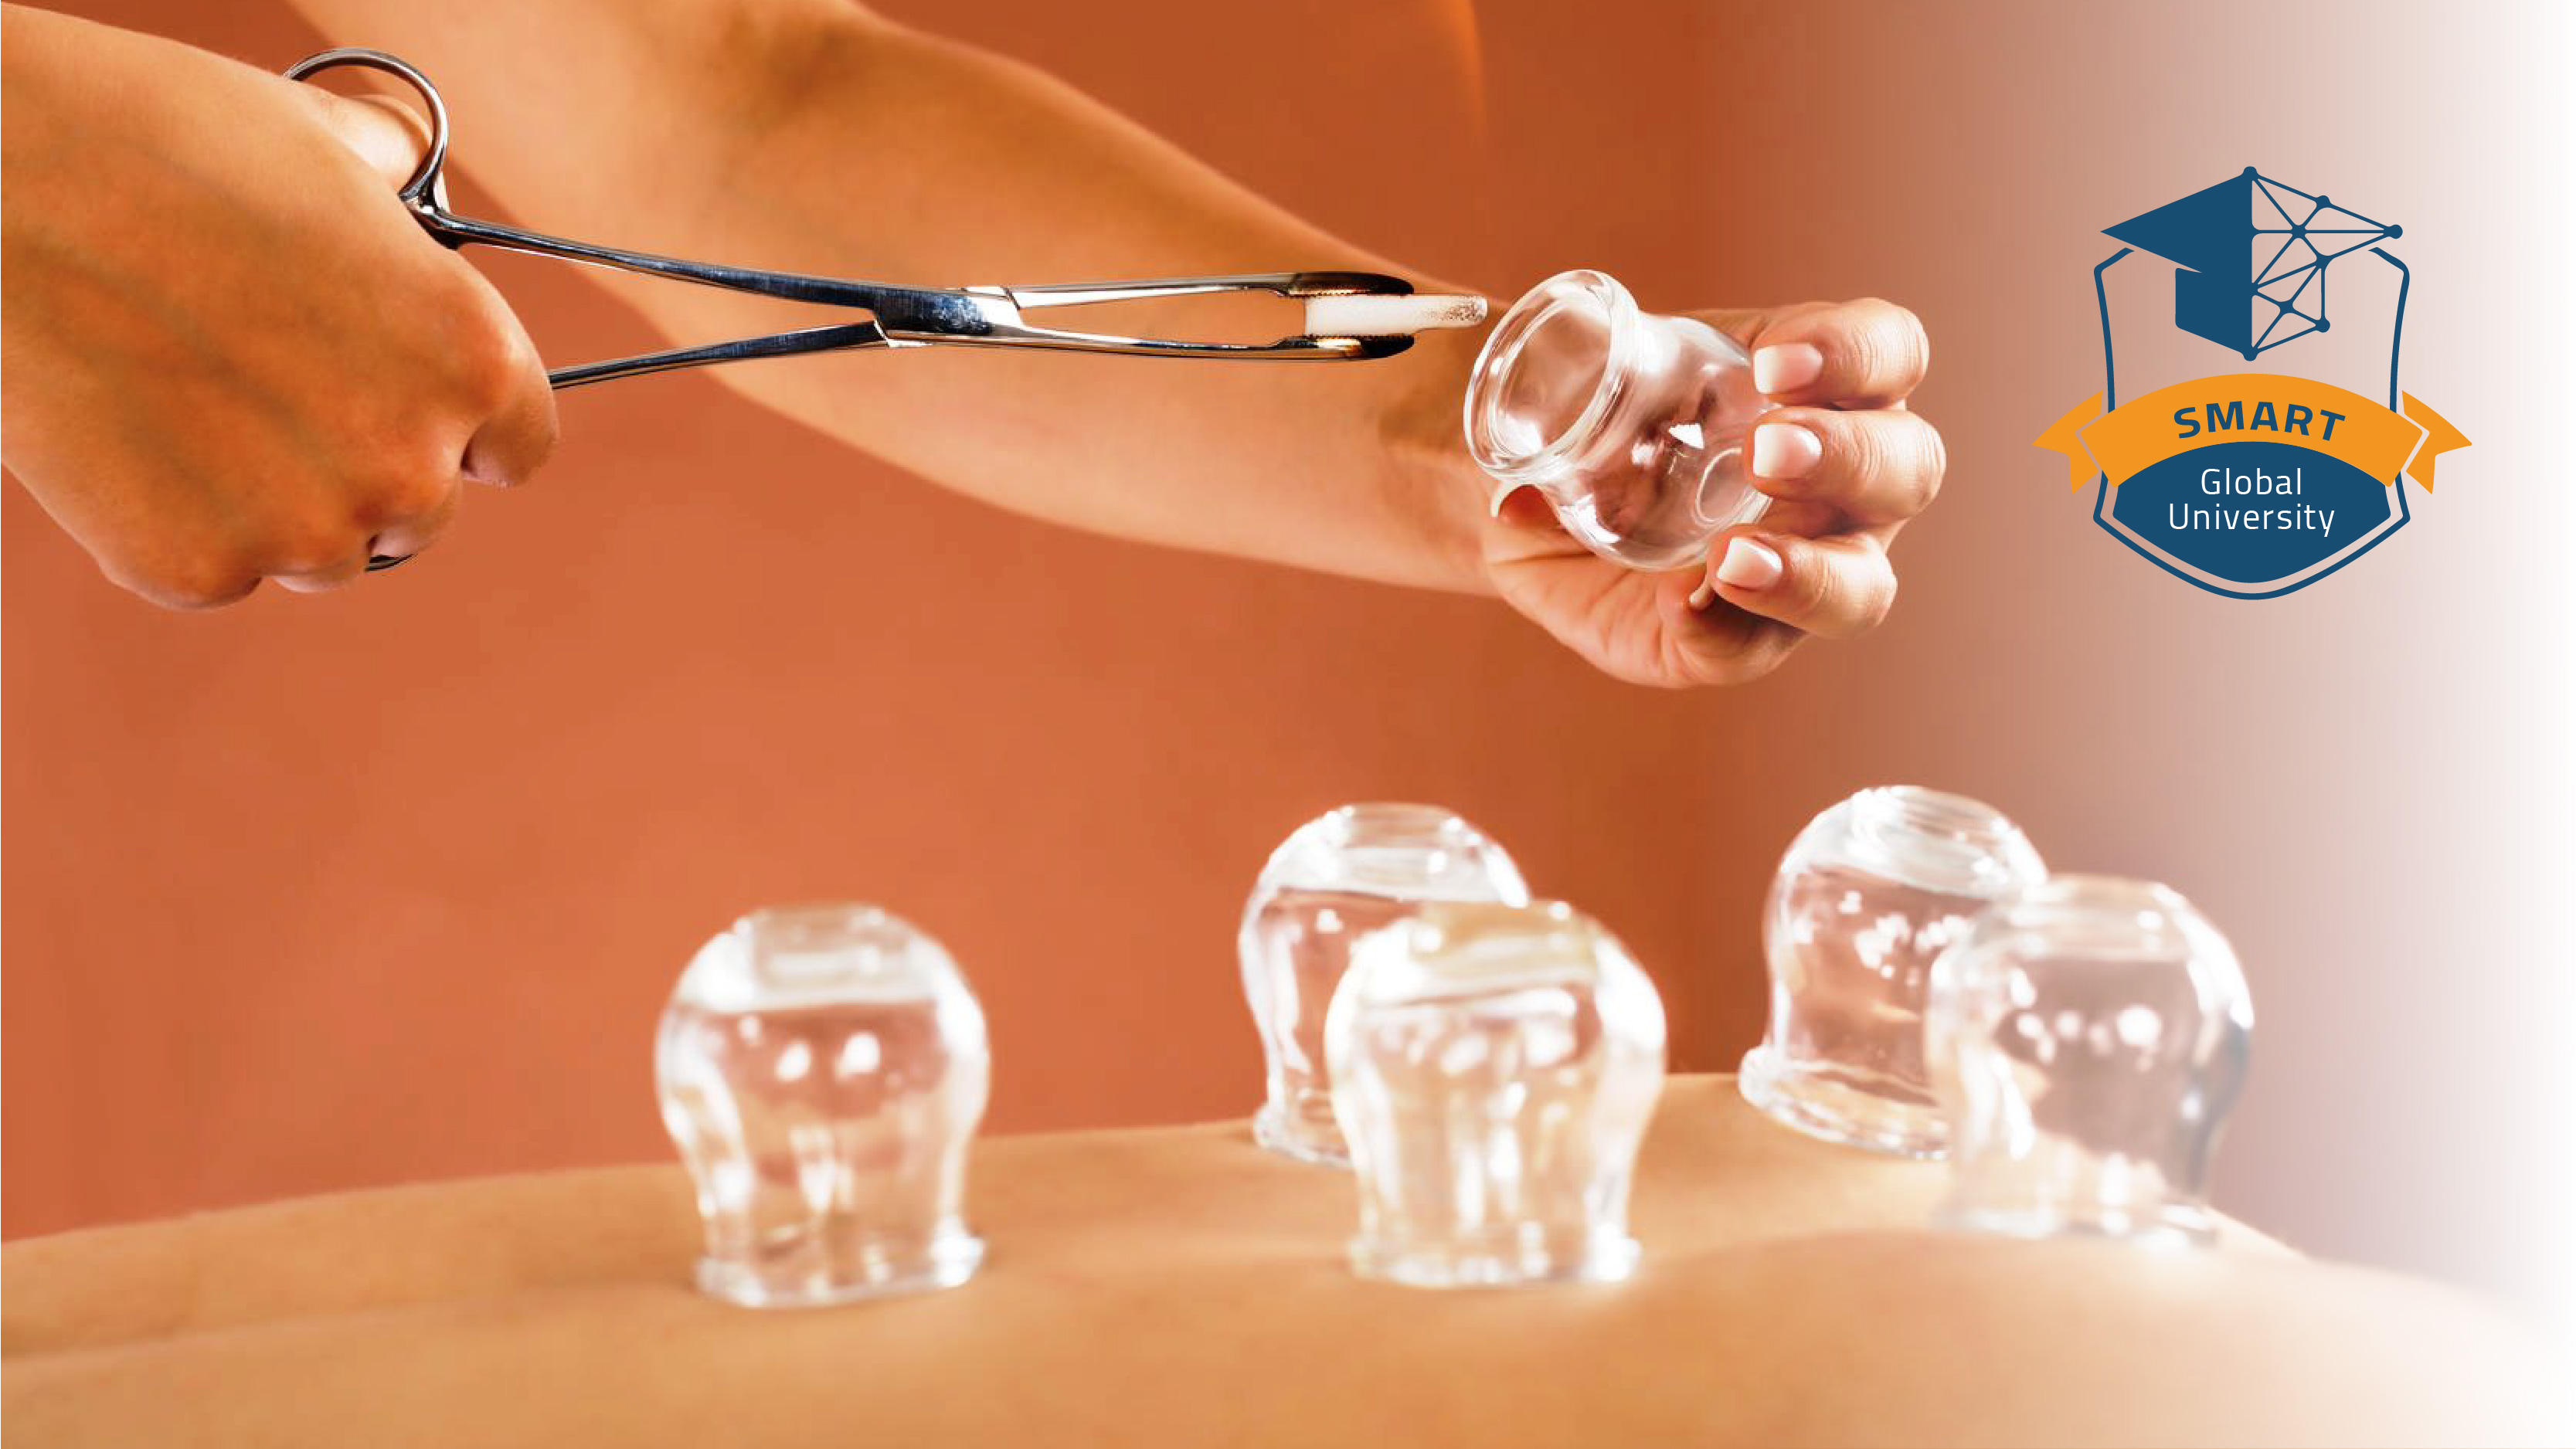 Department of Medical Sciences - Cupping Science